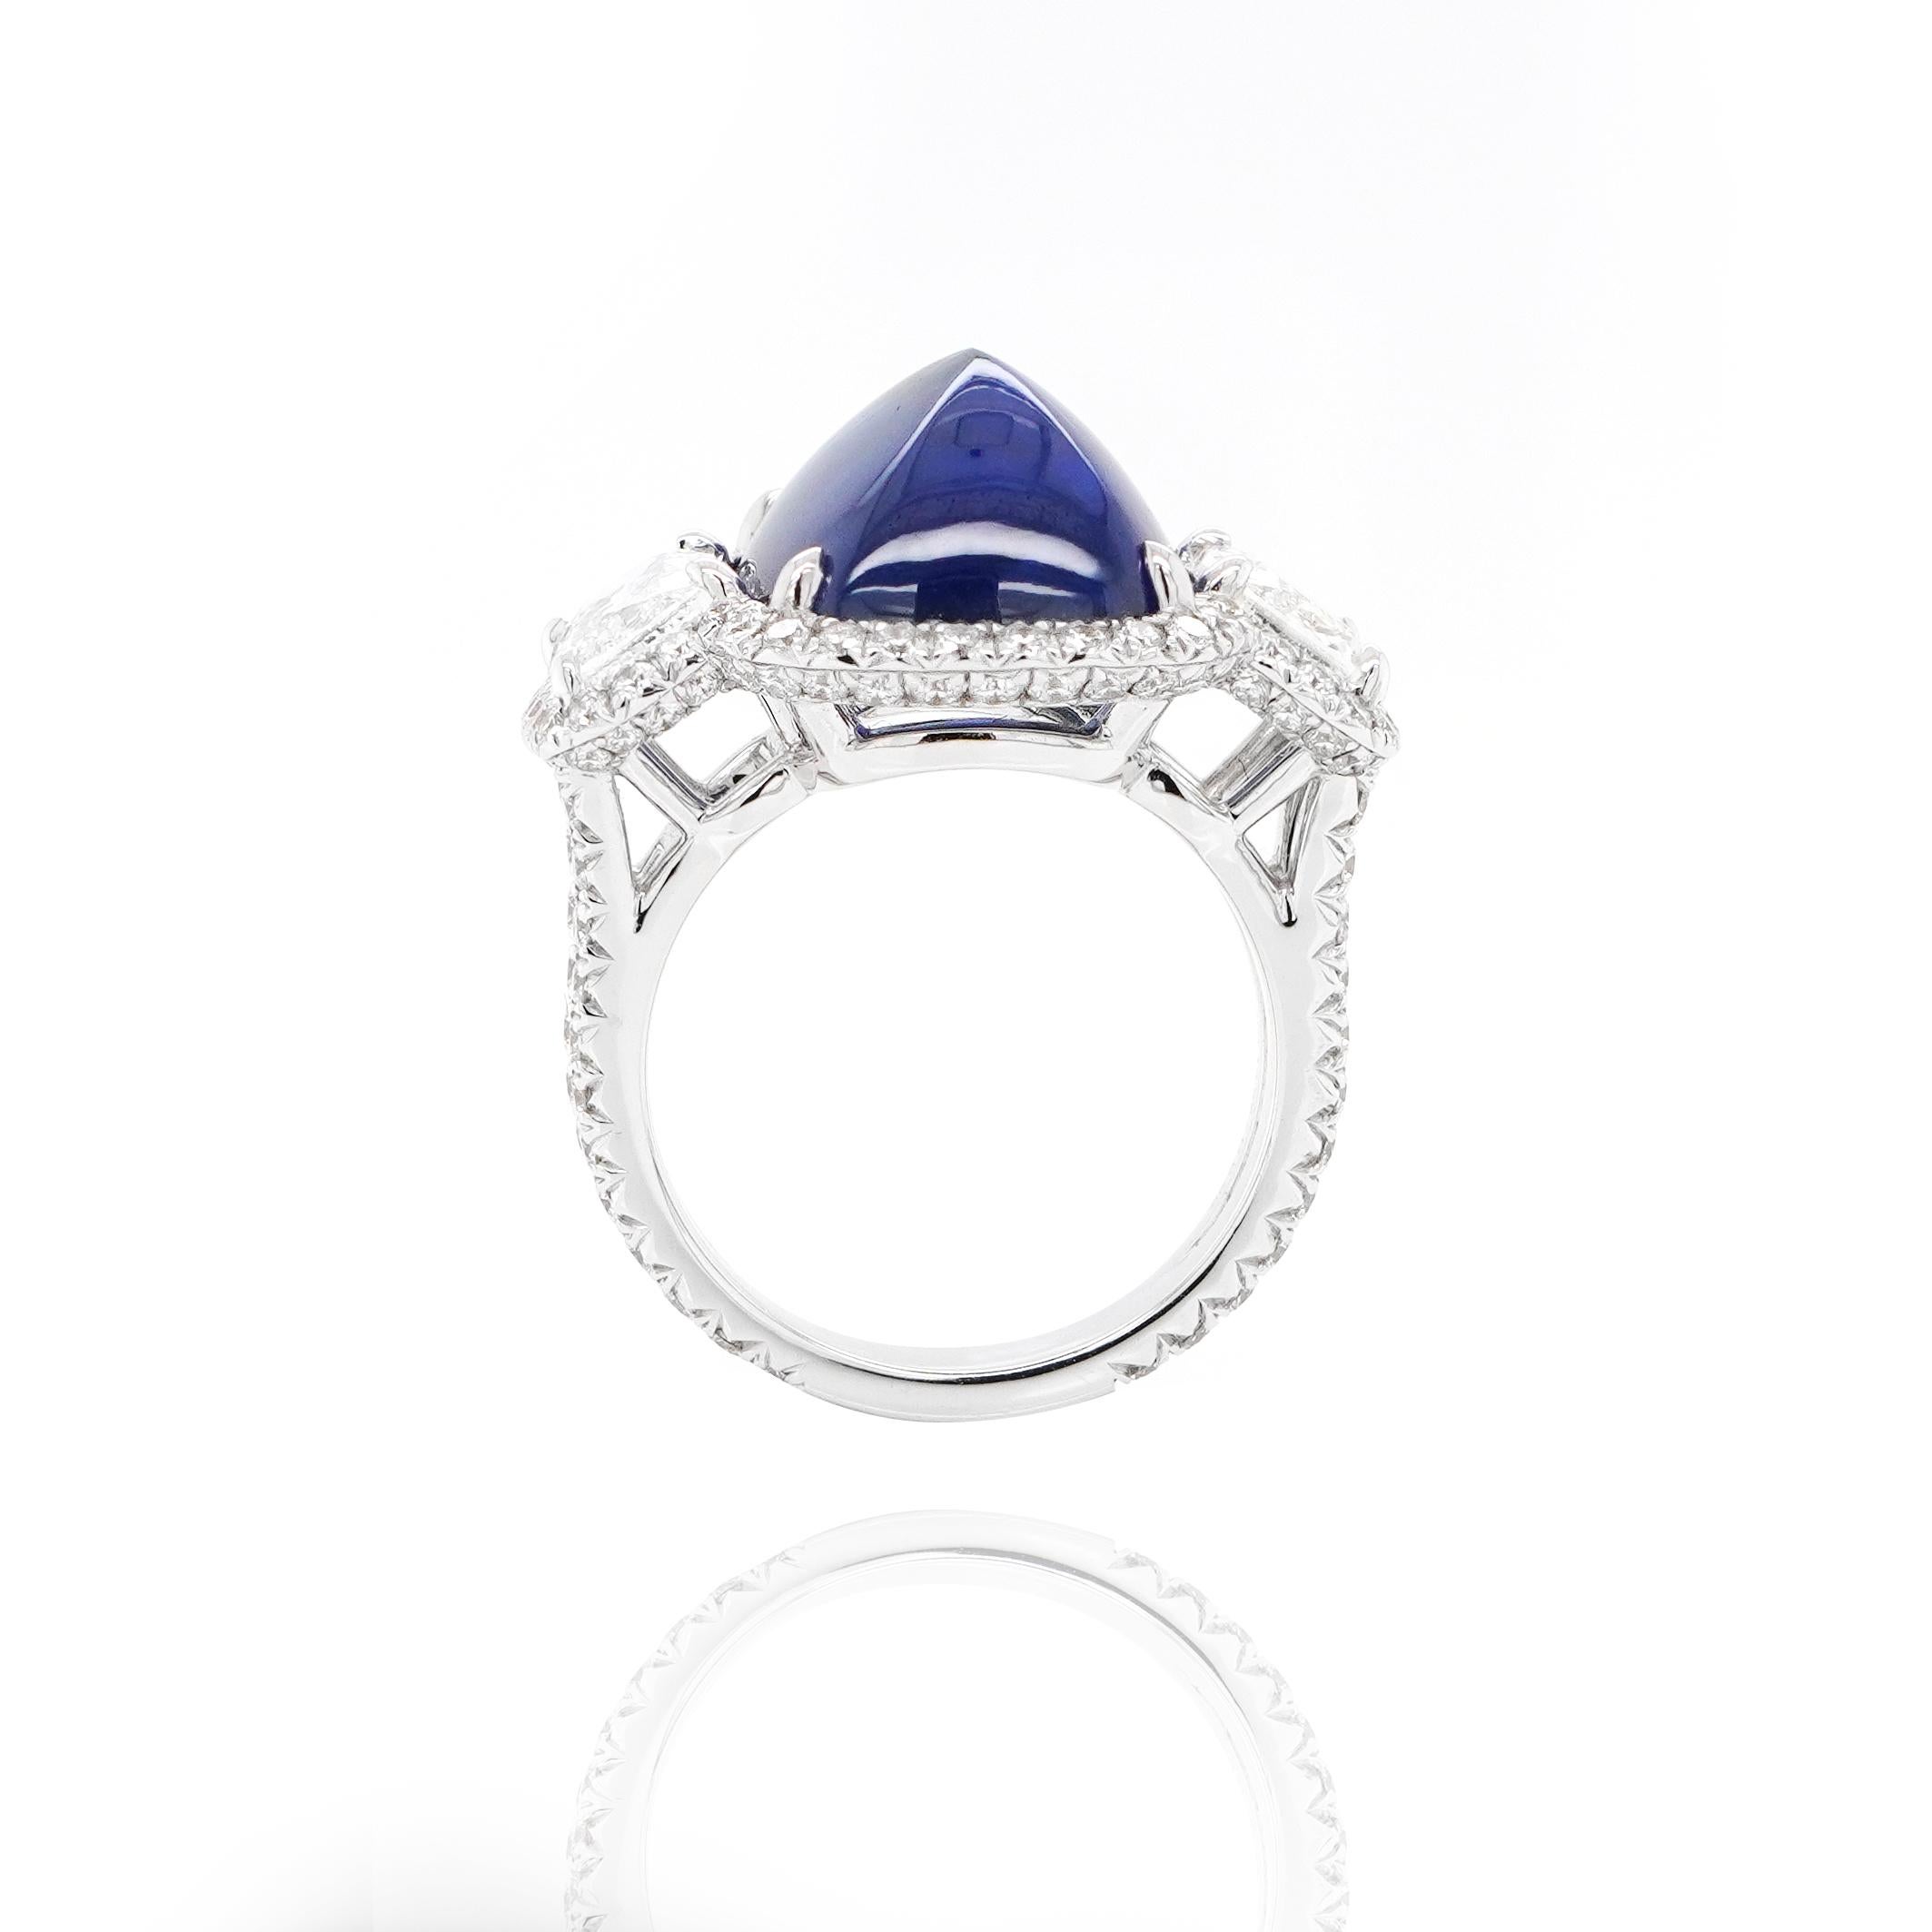 Sugarloaf Cabochon BENJAMIN FINE JEWELRY 13.22 cts Blue Sapphire with Diamond 18K Ring For Sale